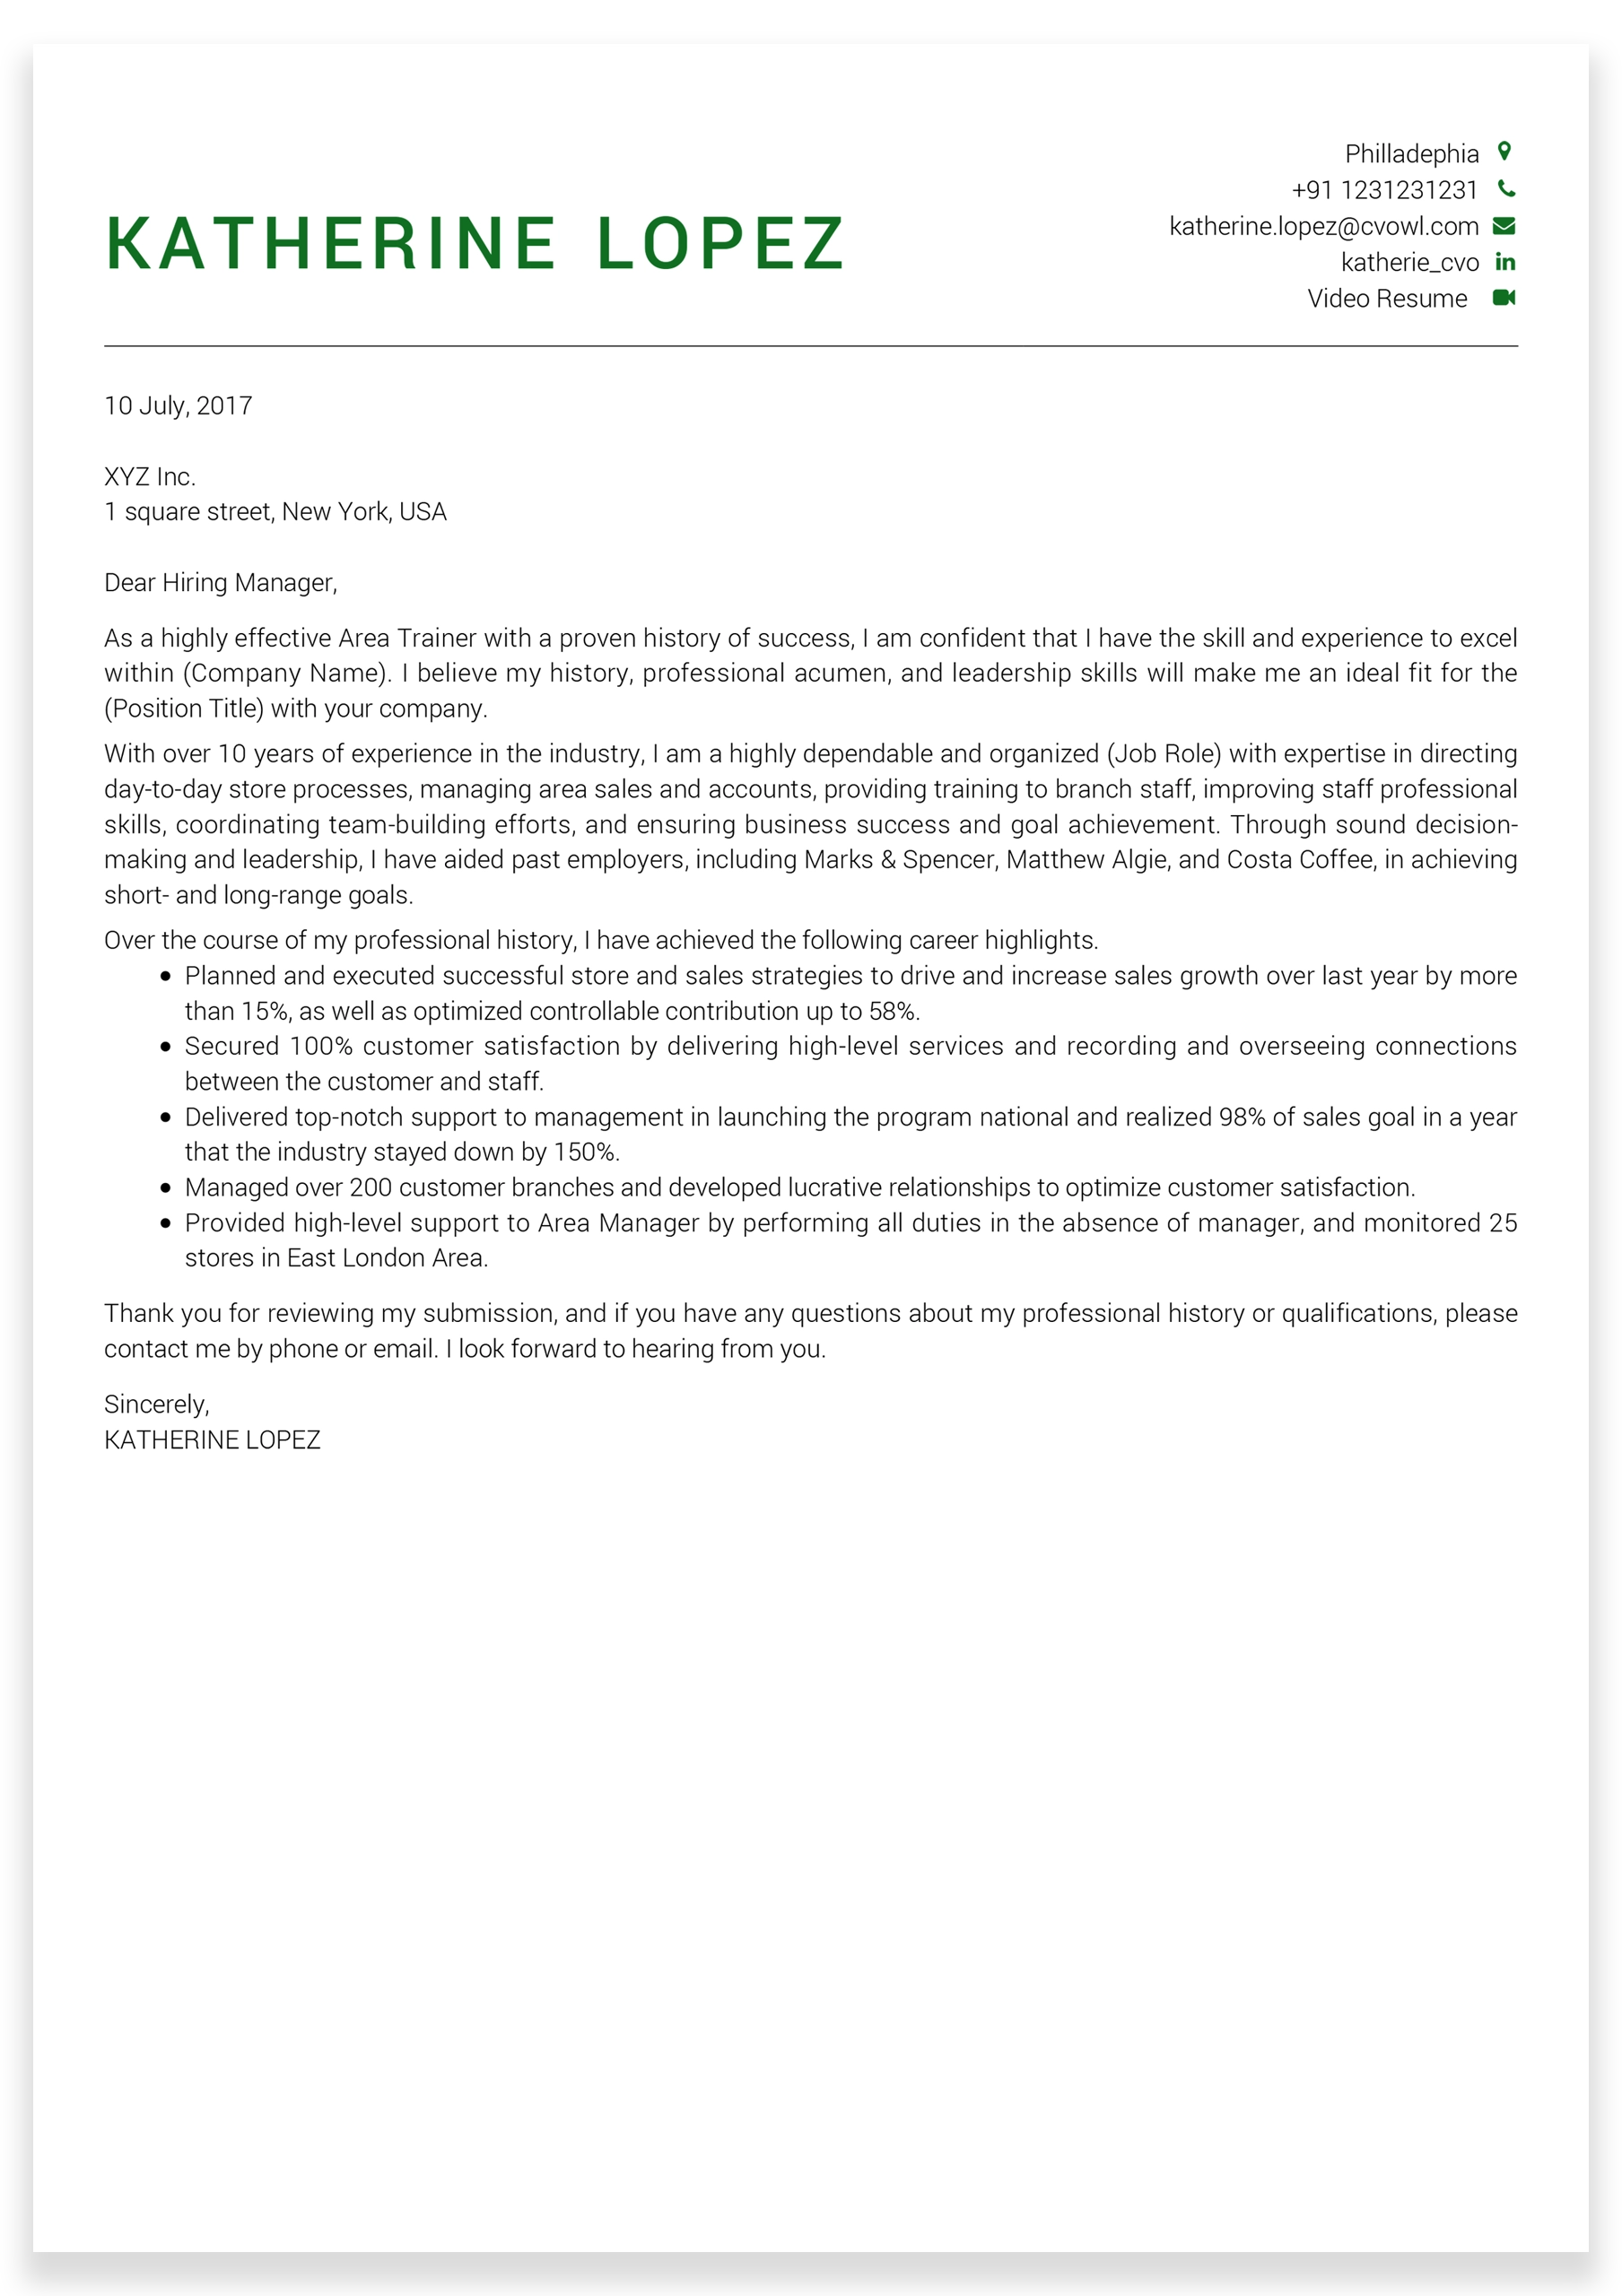 Marketing-Executive-Cover-Letter-sample7